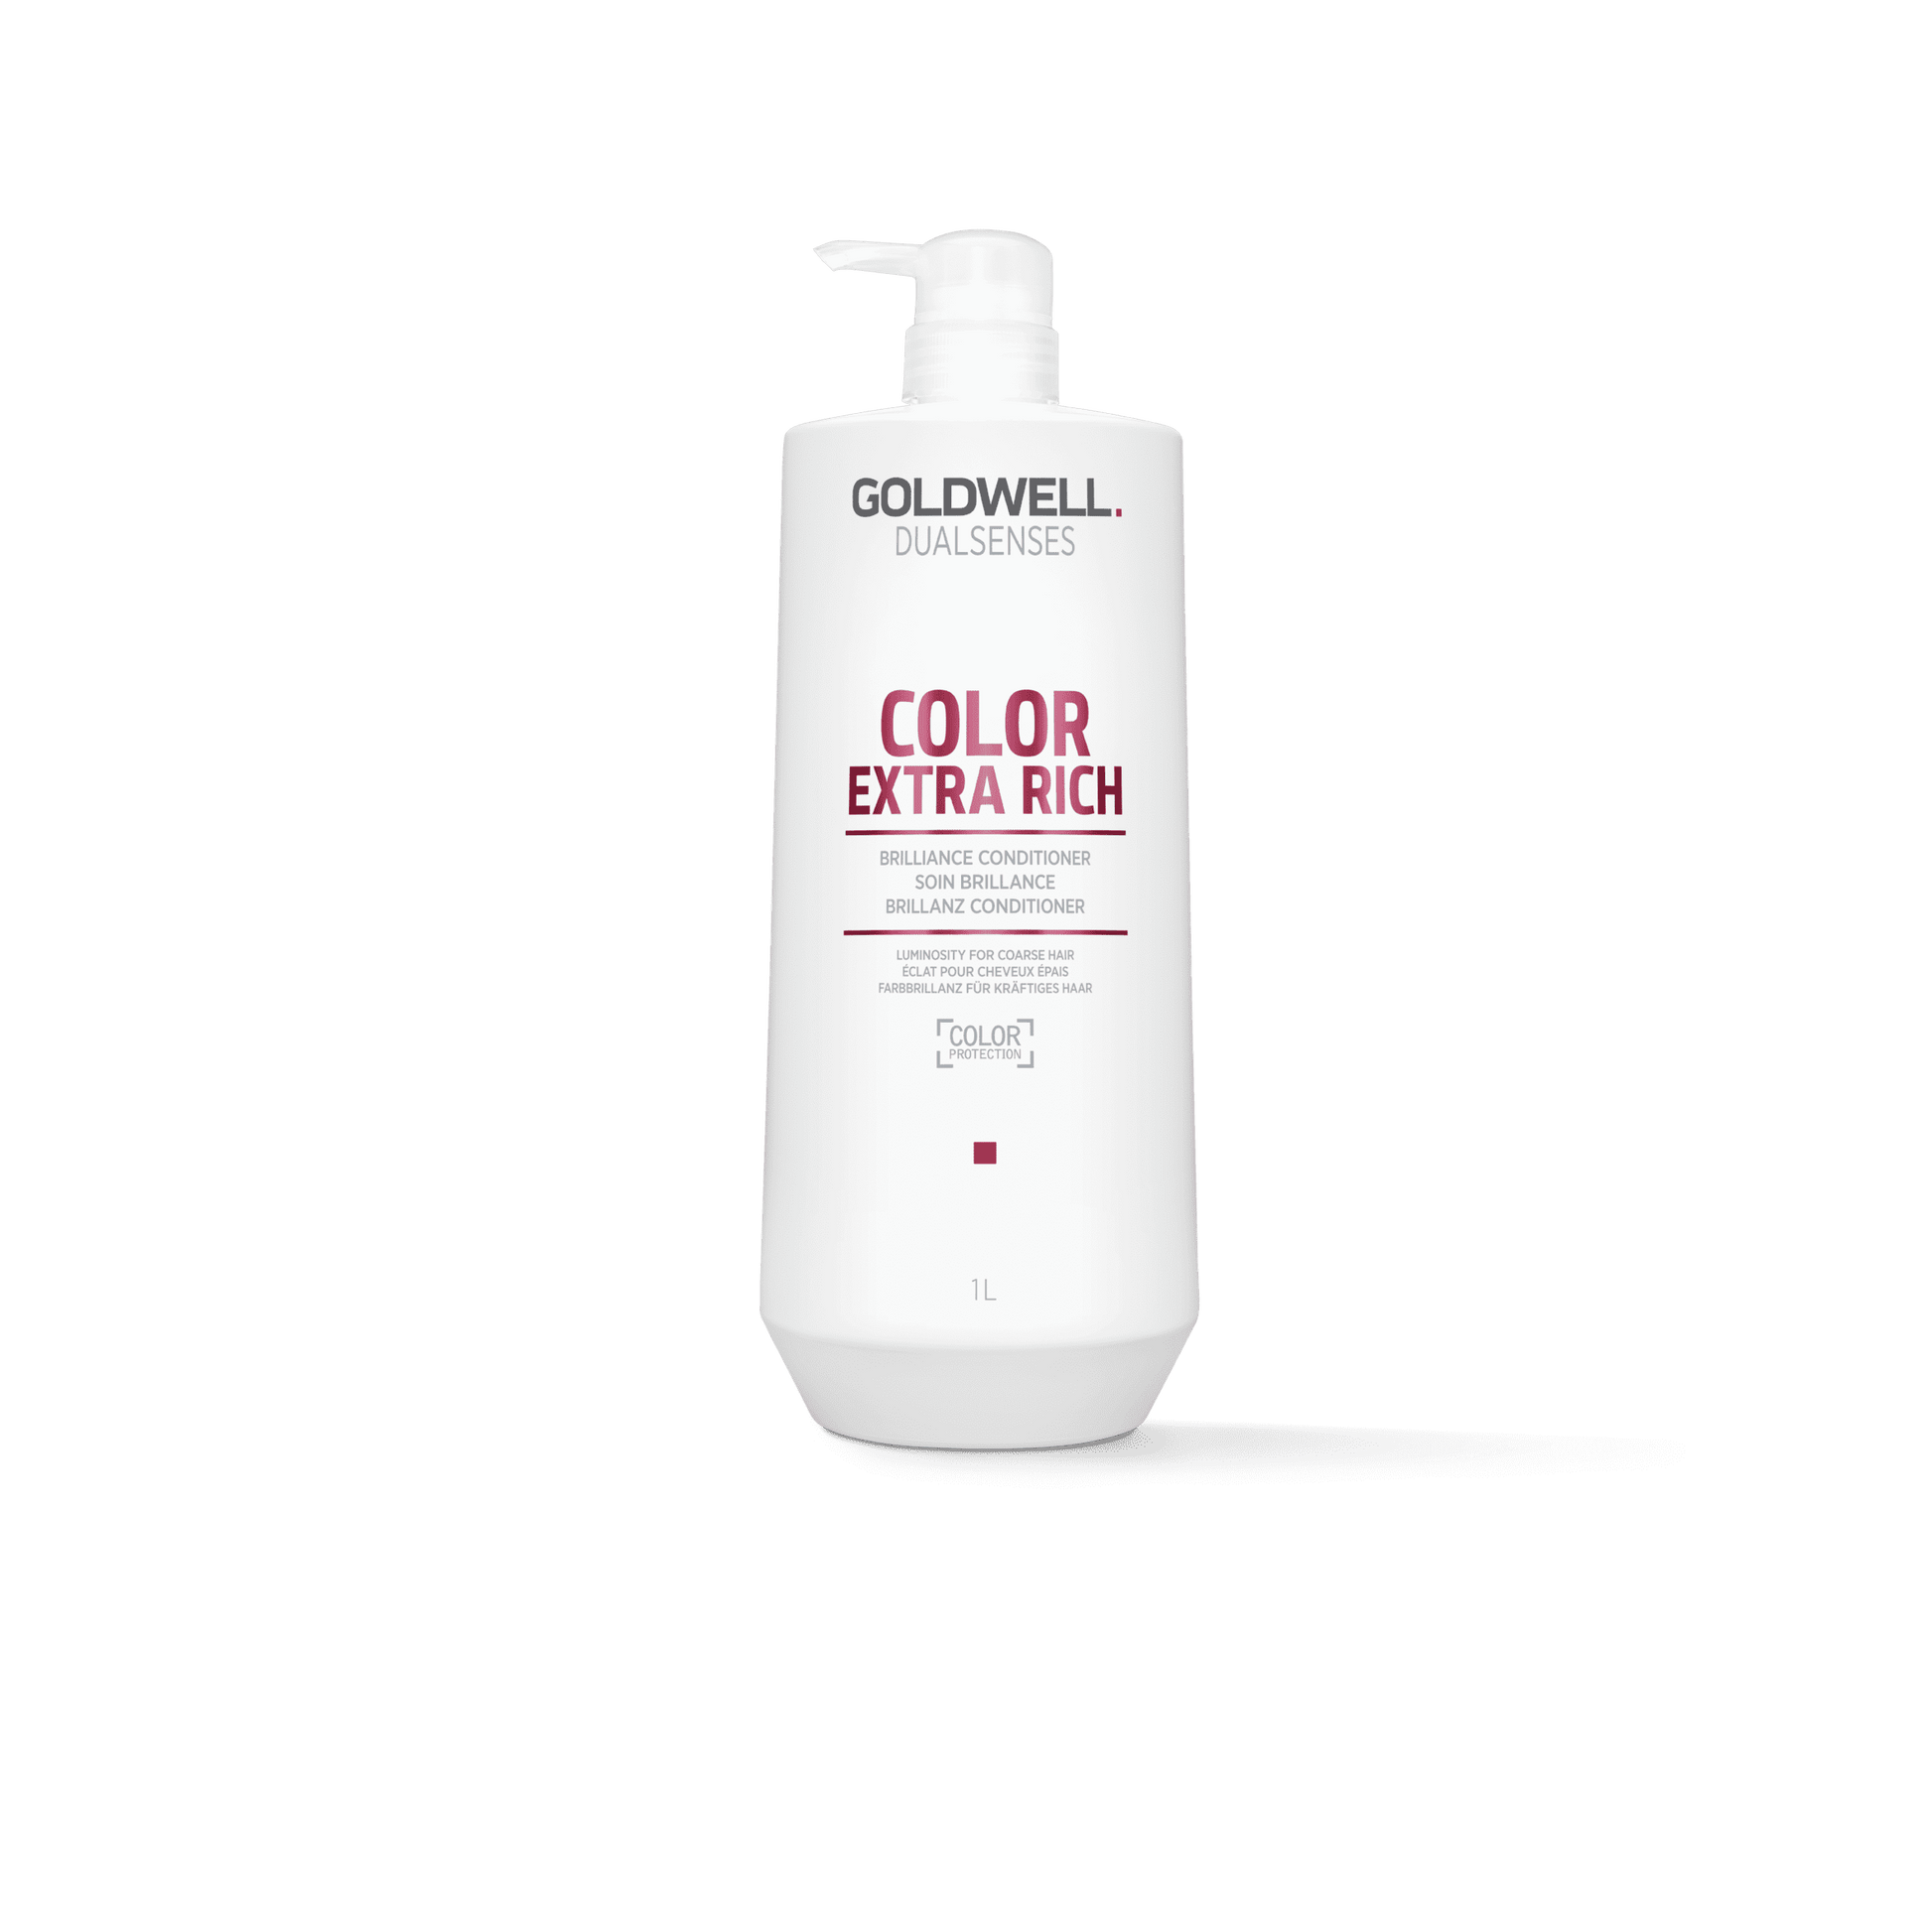 GOLDWELL color Extra Rich Cond. 1000ml | frisor-schafer-online-shop